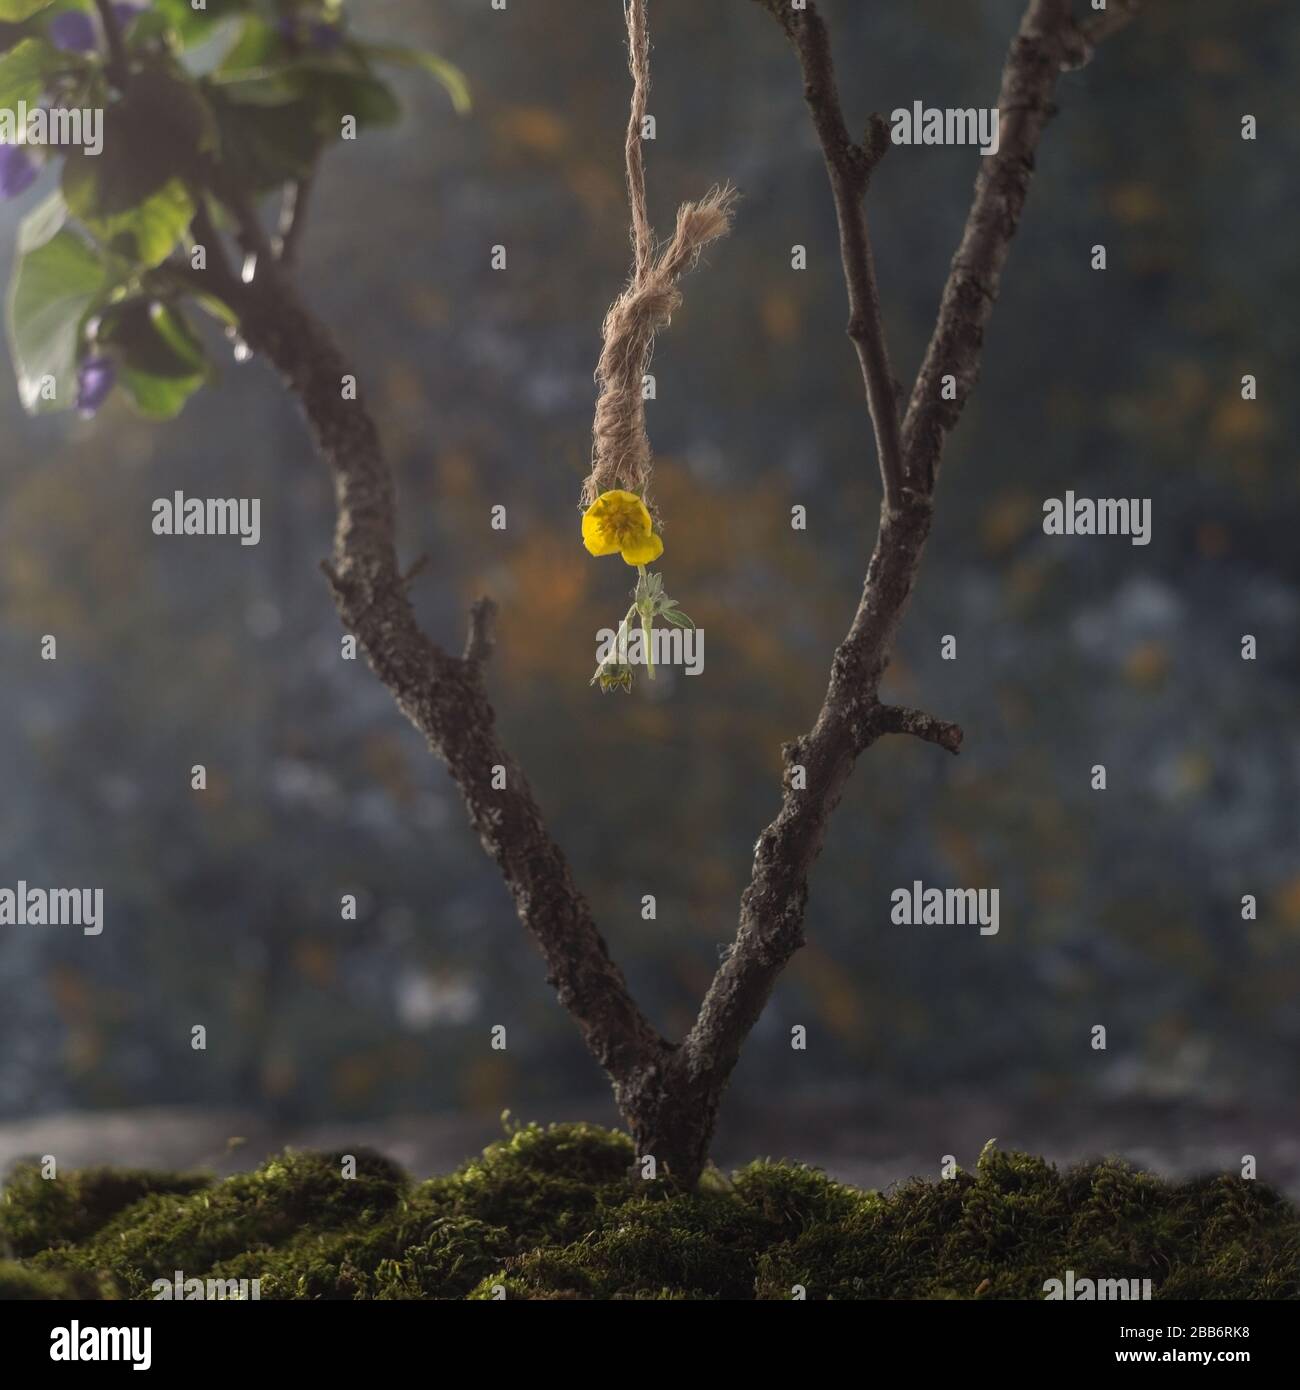 close up, still life concept, yellow flower hanging from a tree on a hanging loop. Suicide concept. On an abstract natural background. child suicide. Stock Photo